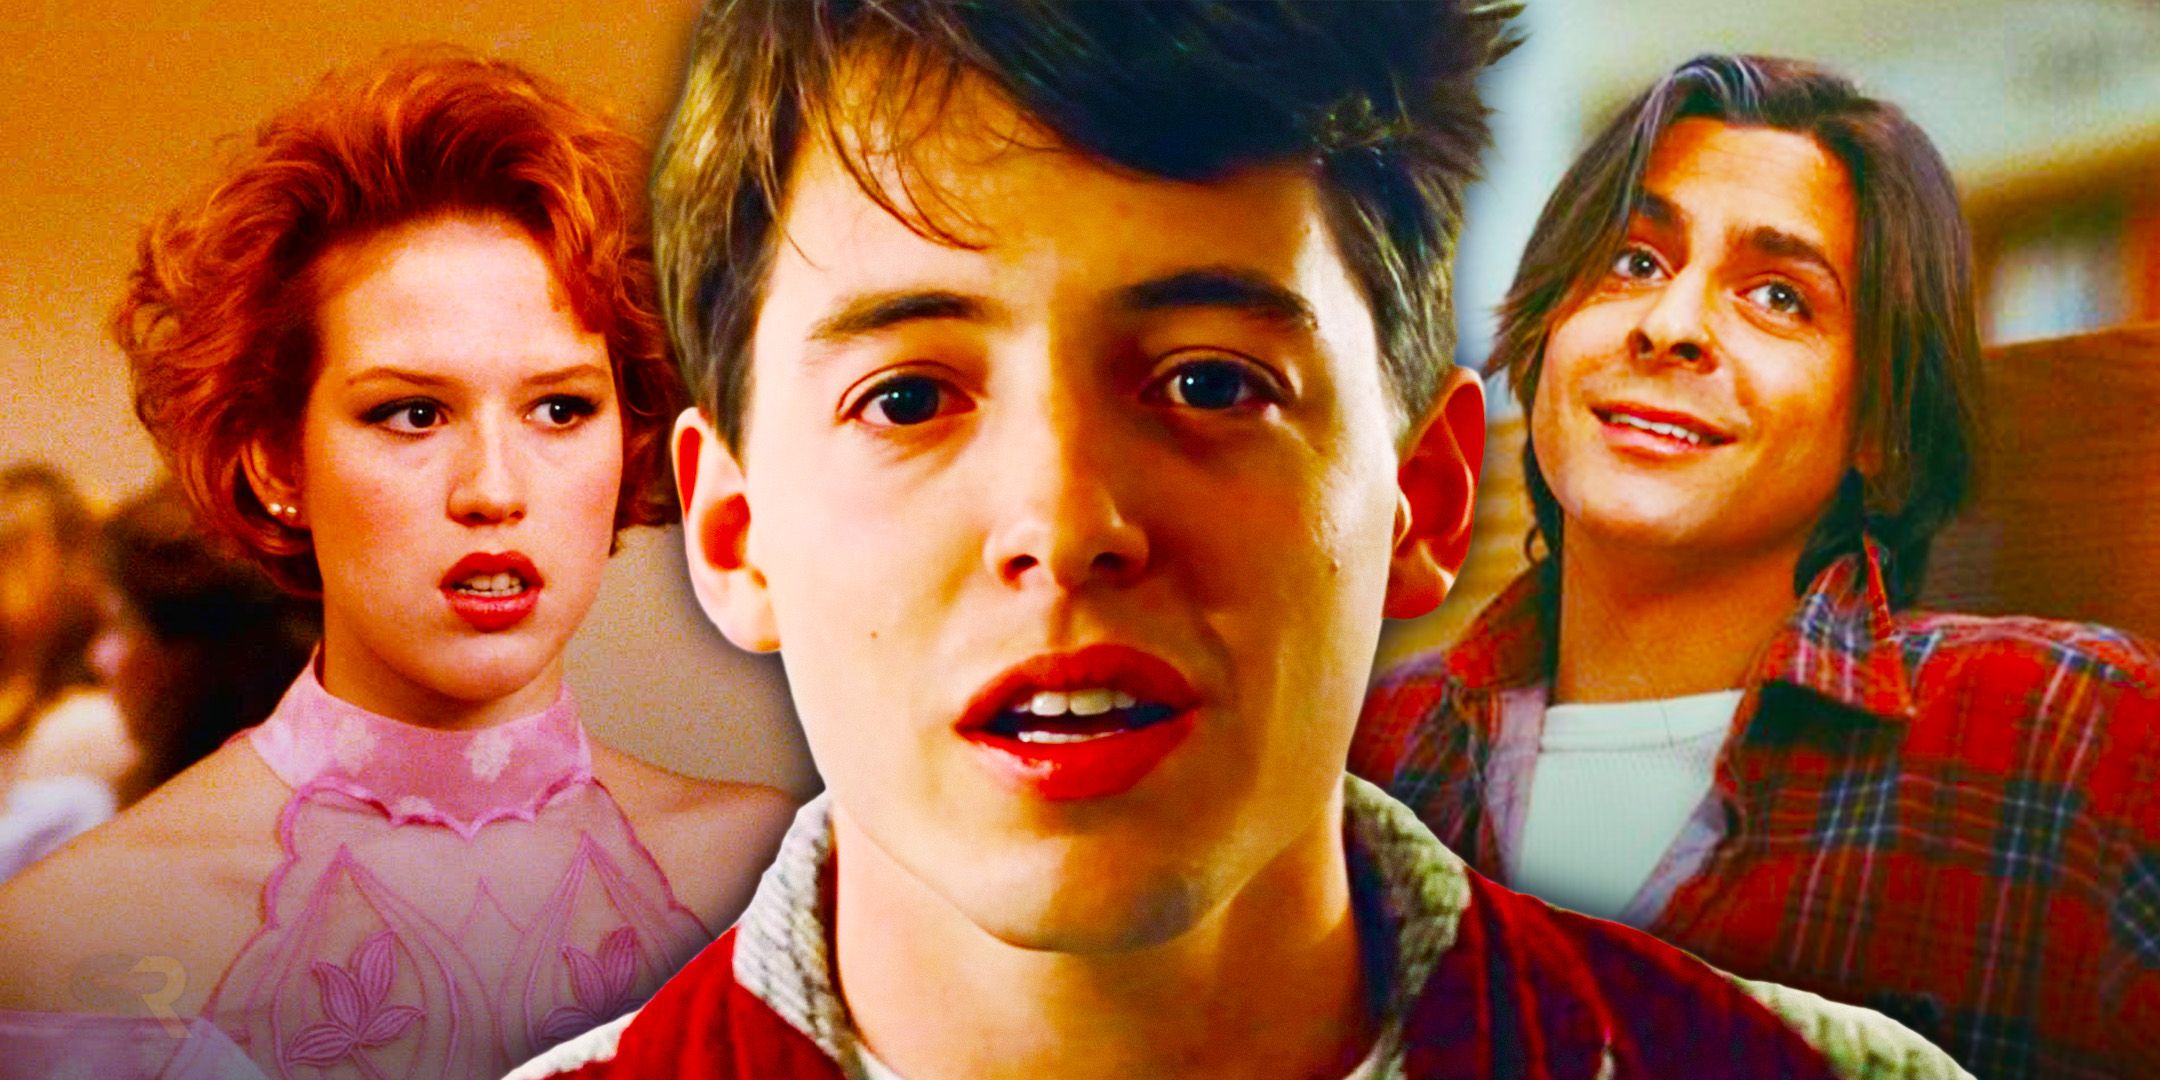 15 Best Quotes From John Hughes Movies Ferris Bueller's Day Off The Breakfast Club